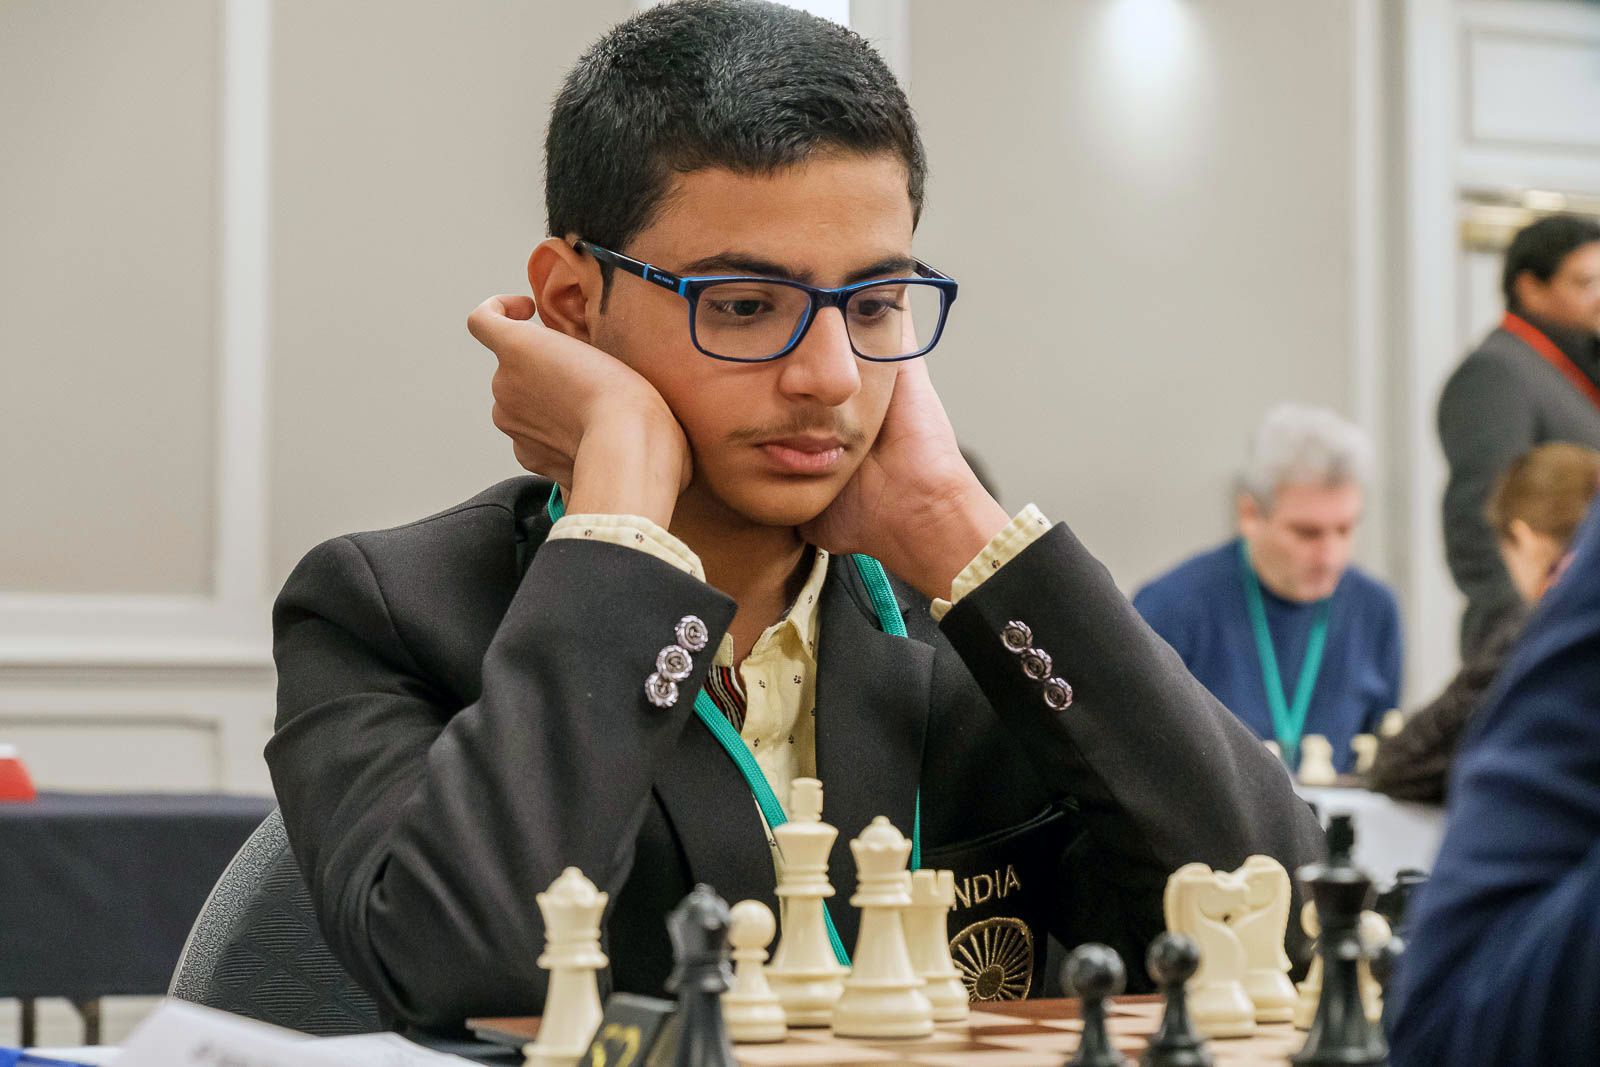 Greenwich student youngest ever chess master